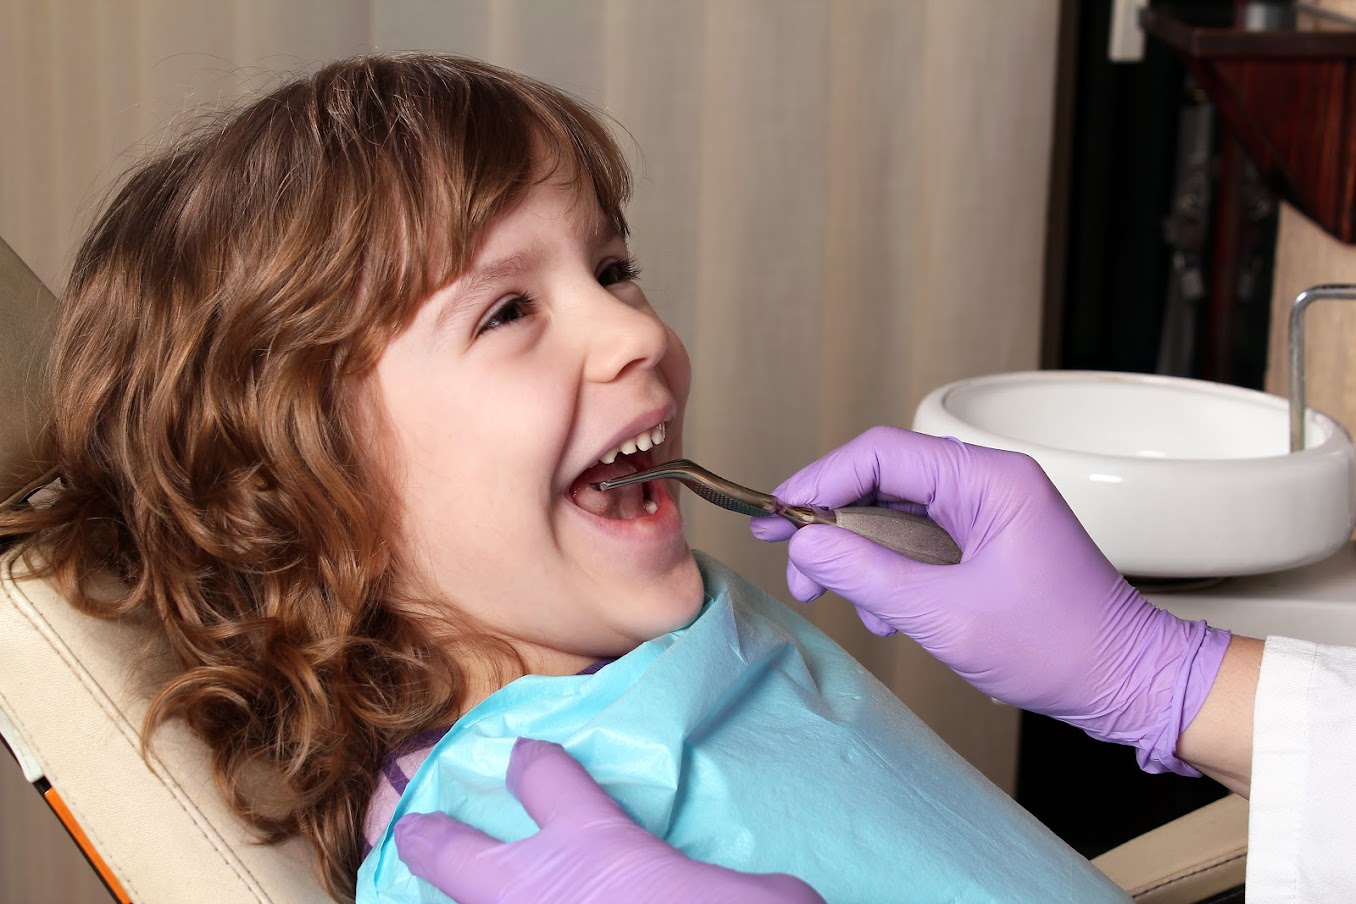 This is the image for the news article titled How To Prepare Your Child for Their First Dental Visit